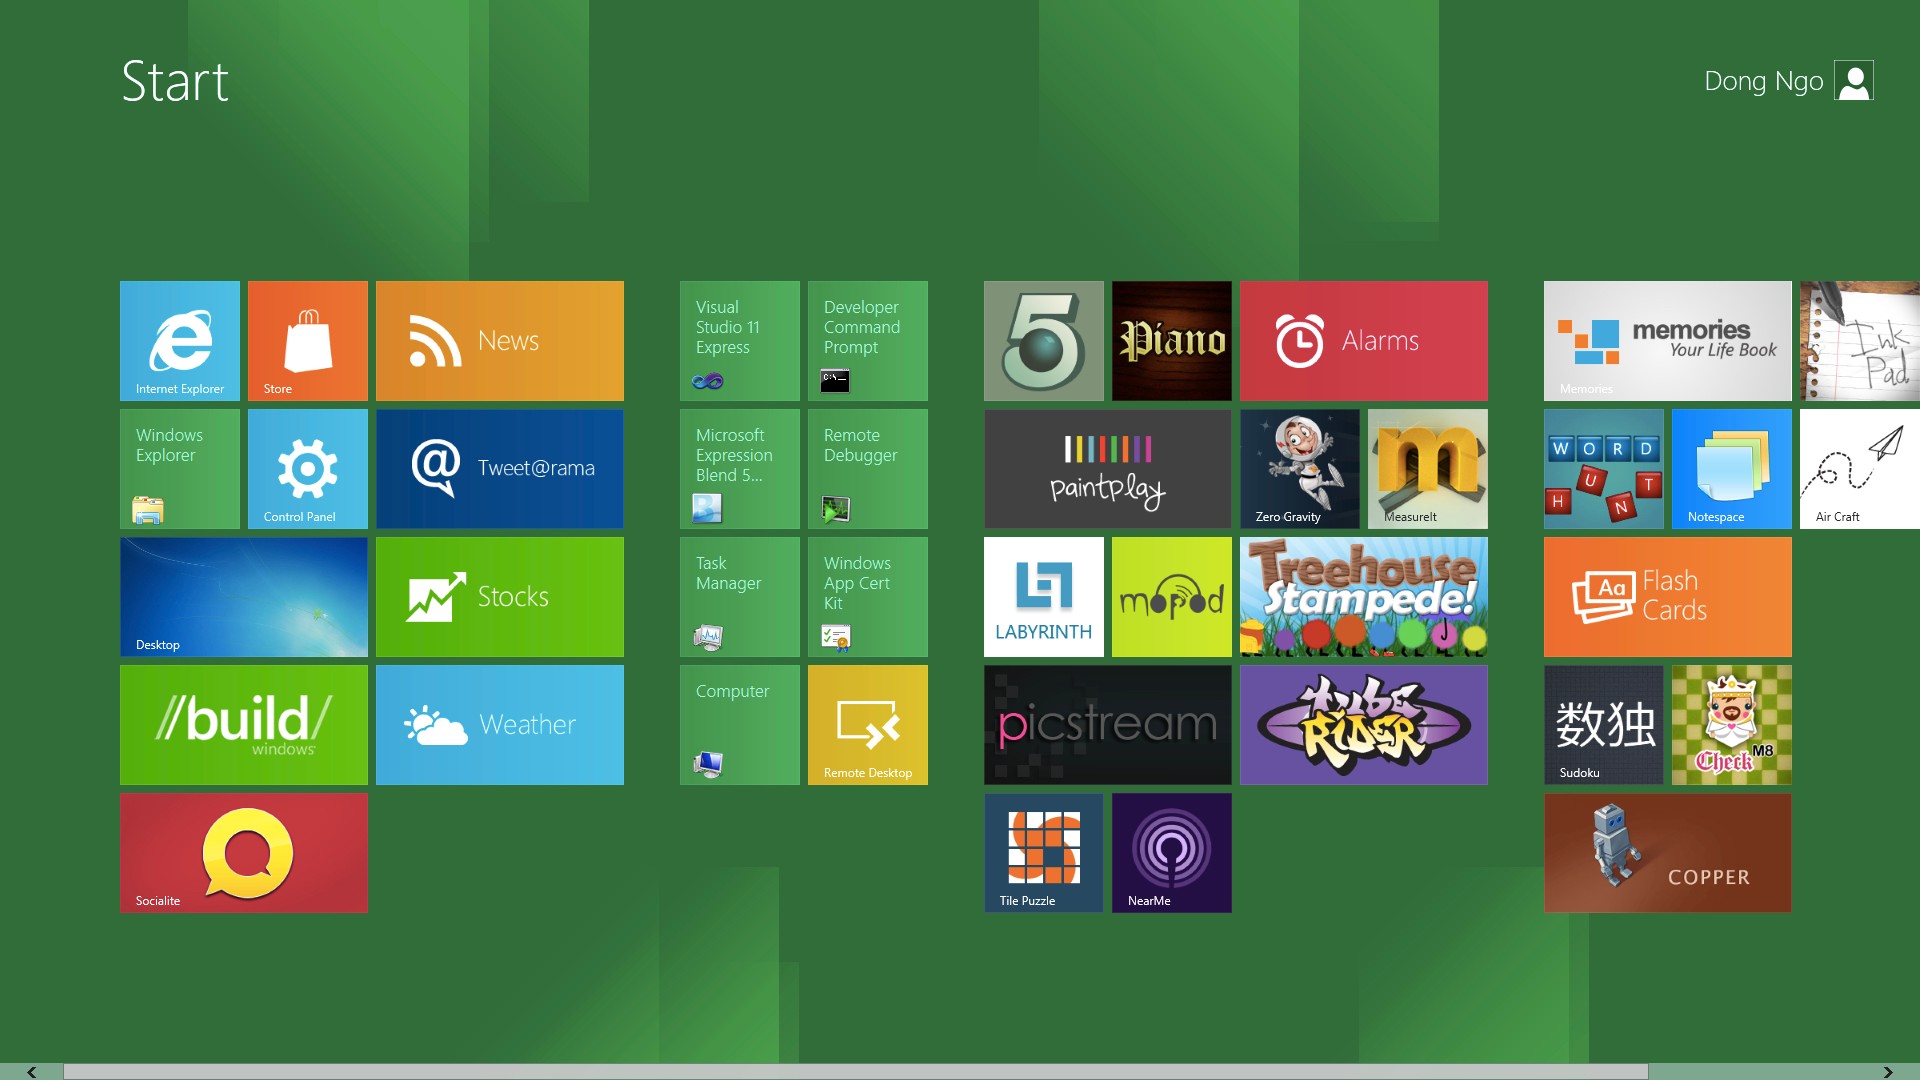 Windows 8's grid menu with all applications.